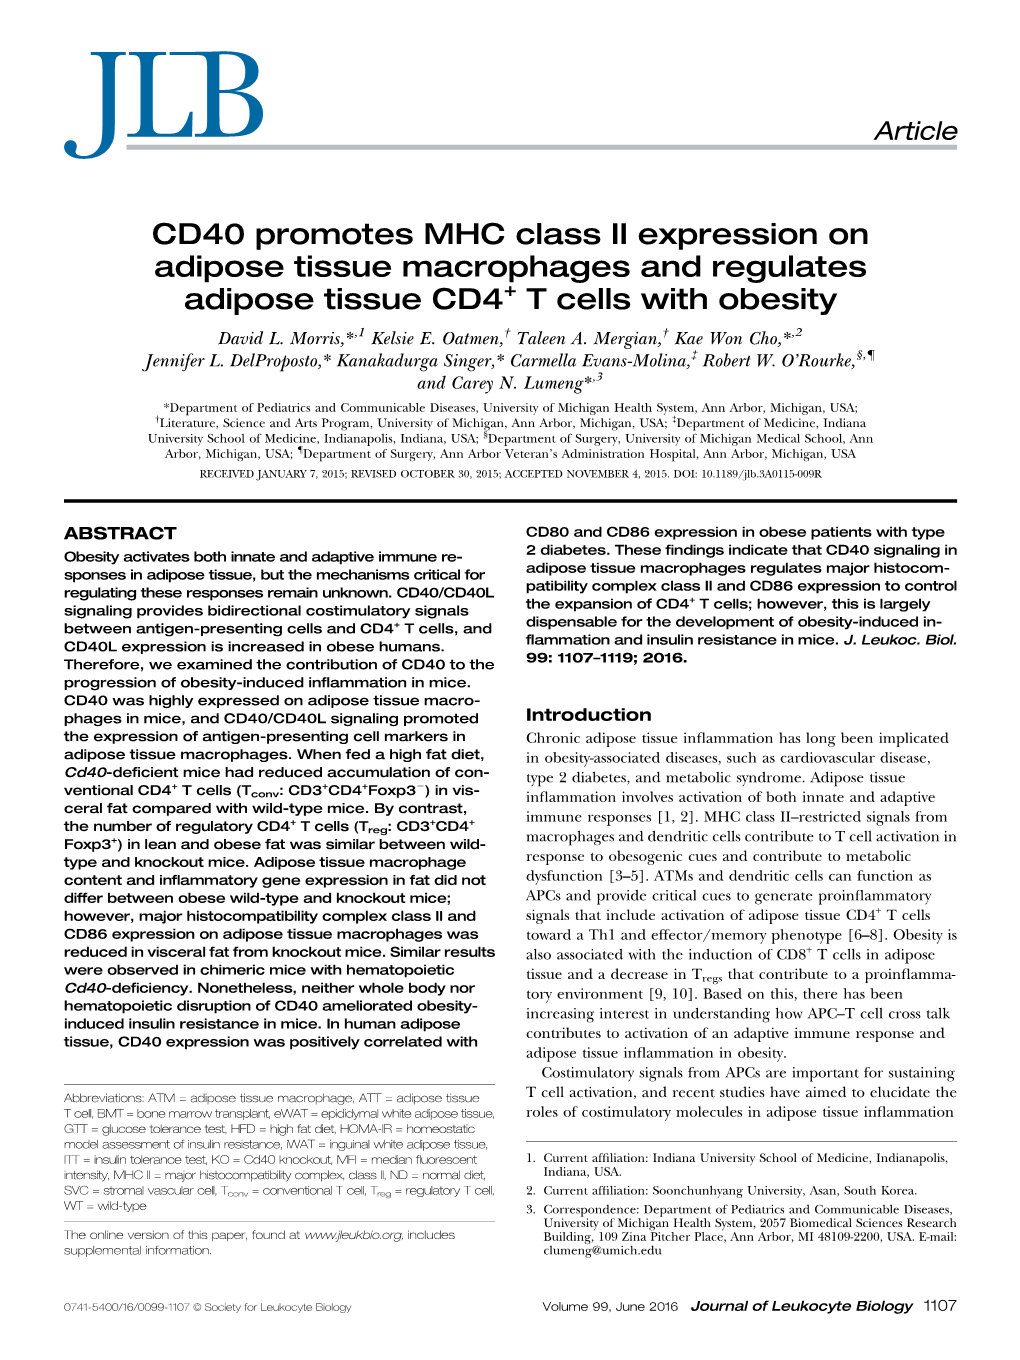 CD40 Promotes MHC Class II Expression on Adipose Tissue Macrophages and Regulates Adipose Tissue CD4+ T Cells with Obesity † † David L